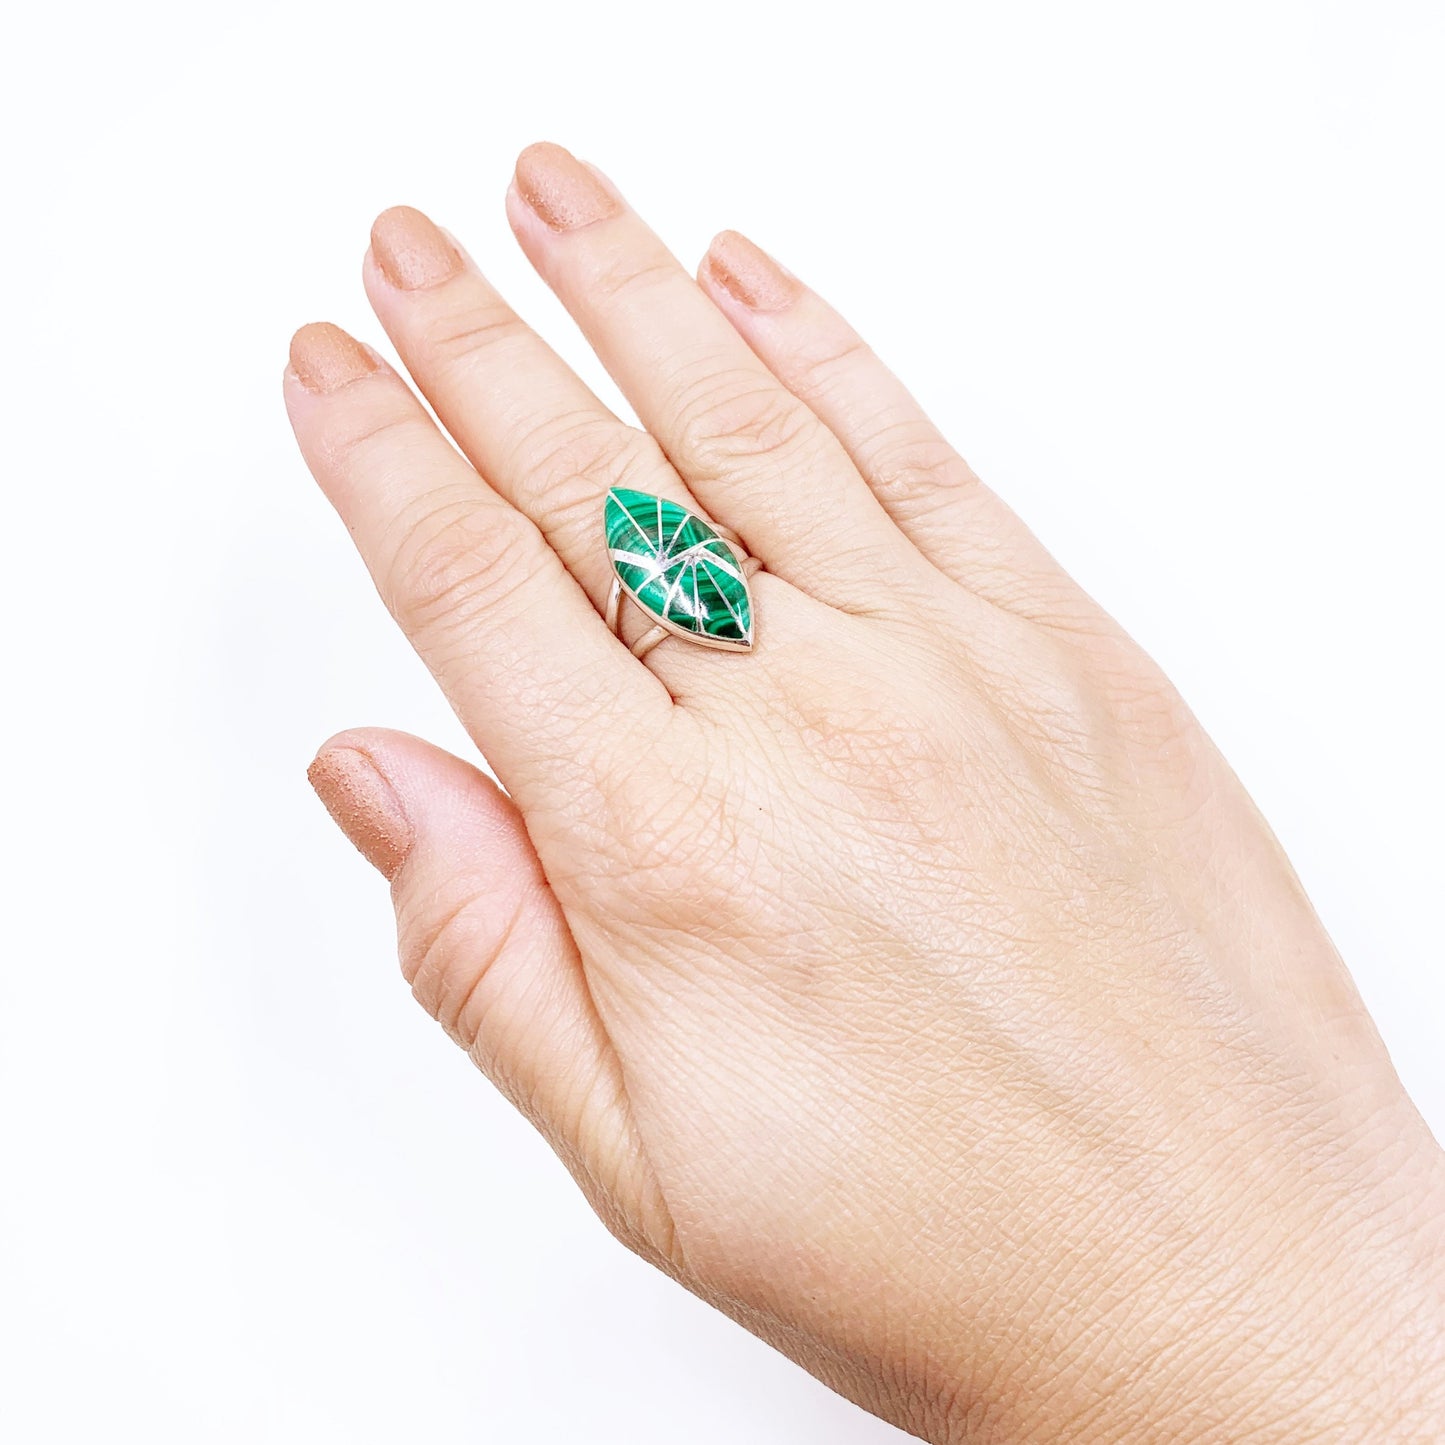 Vintage Silver Malachite Inlay Ring | Silver Malachite Navette Ring | Size 7 1/2 Ring